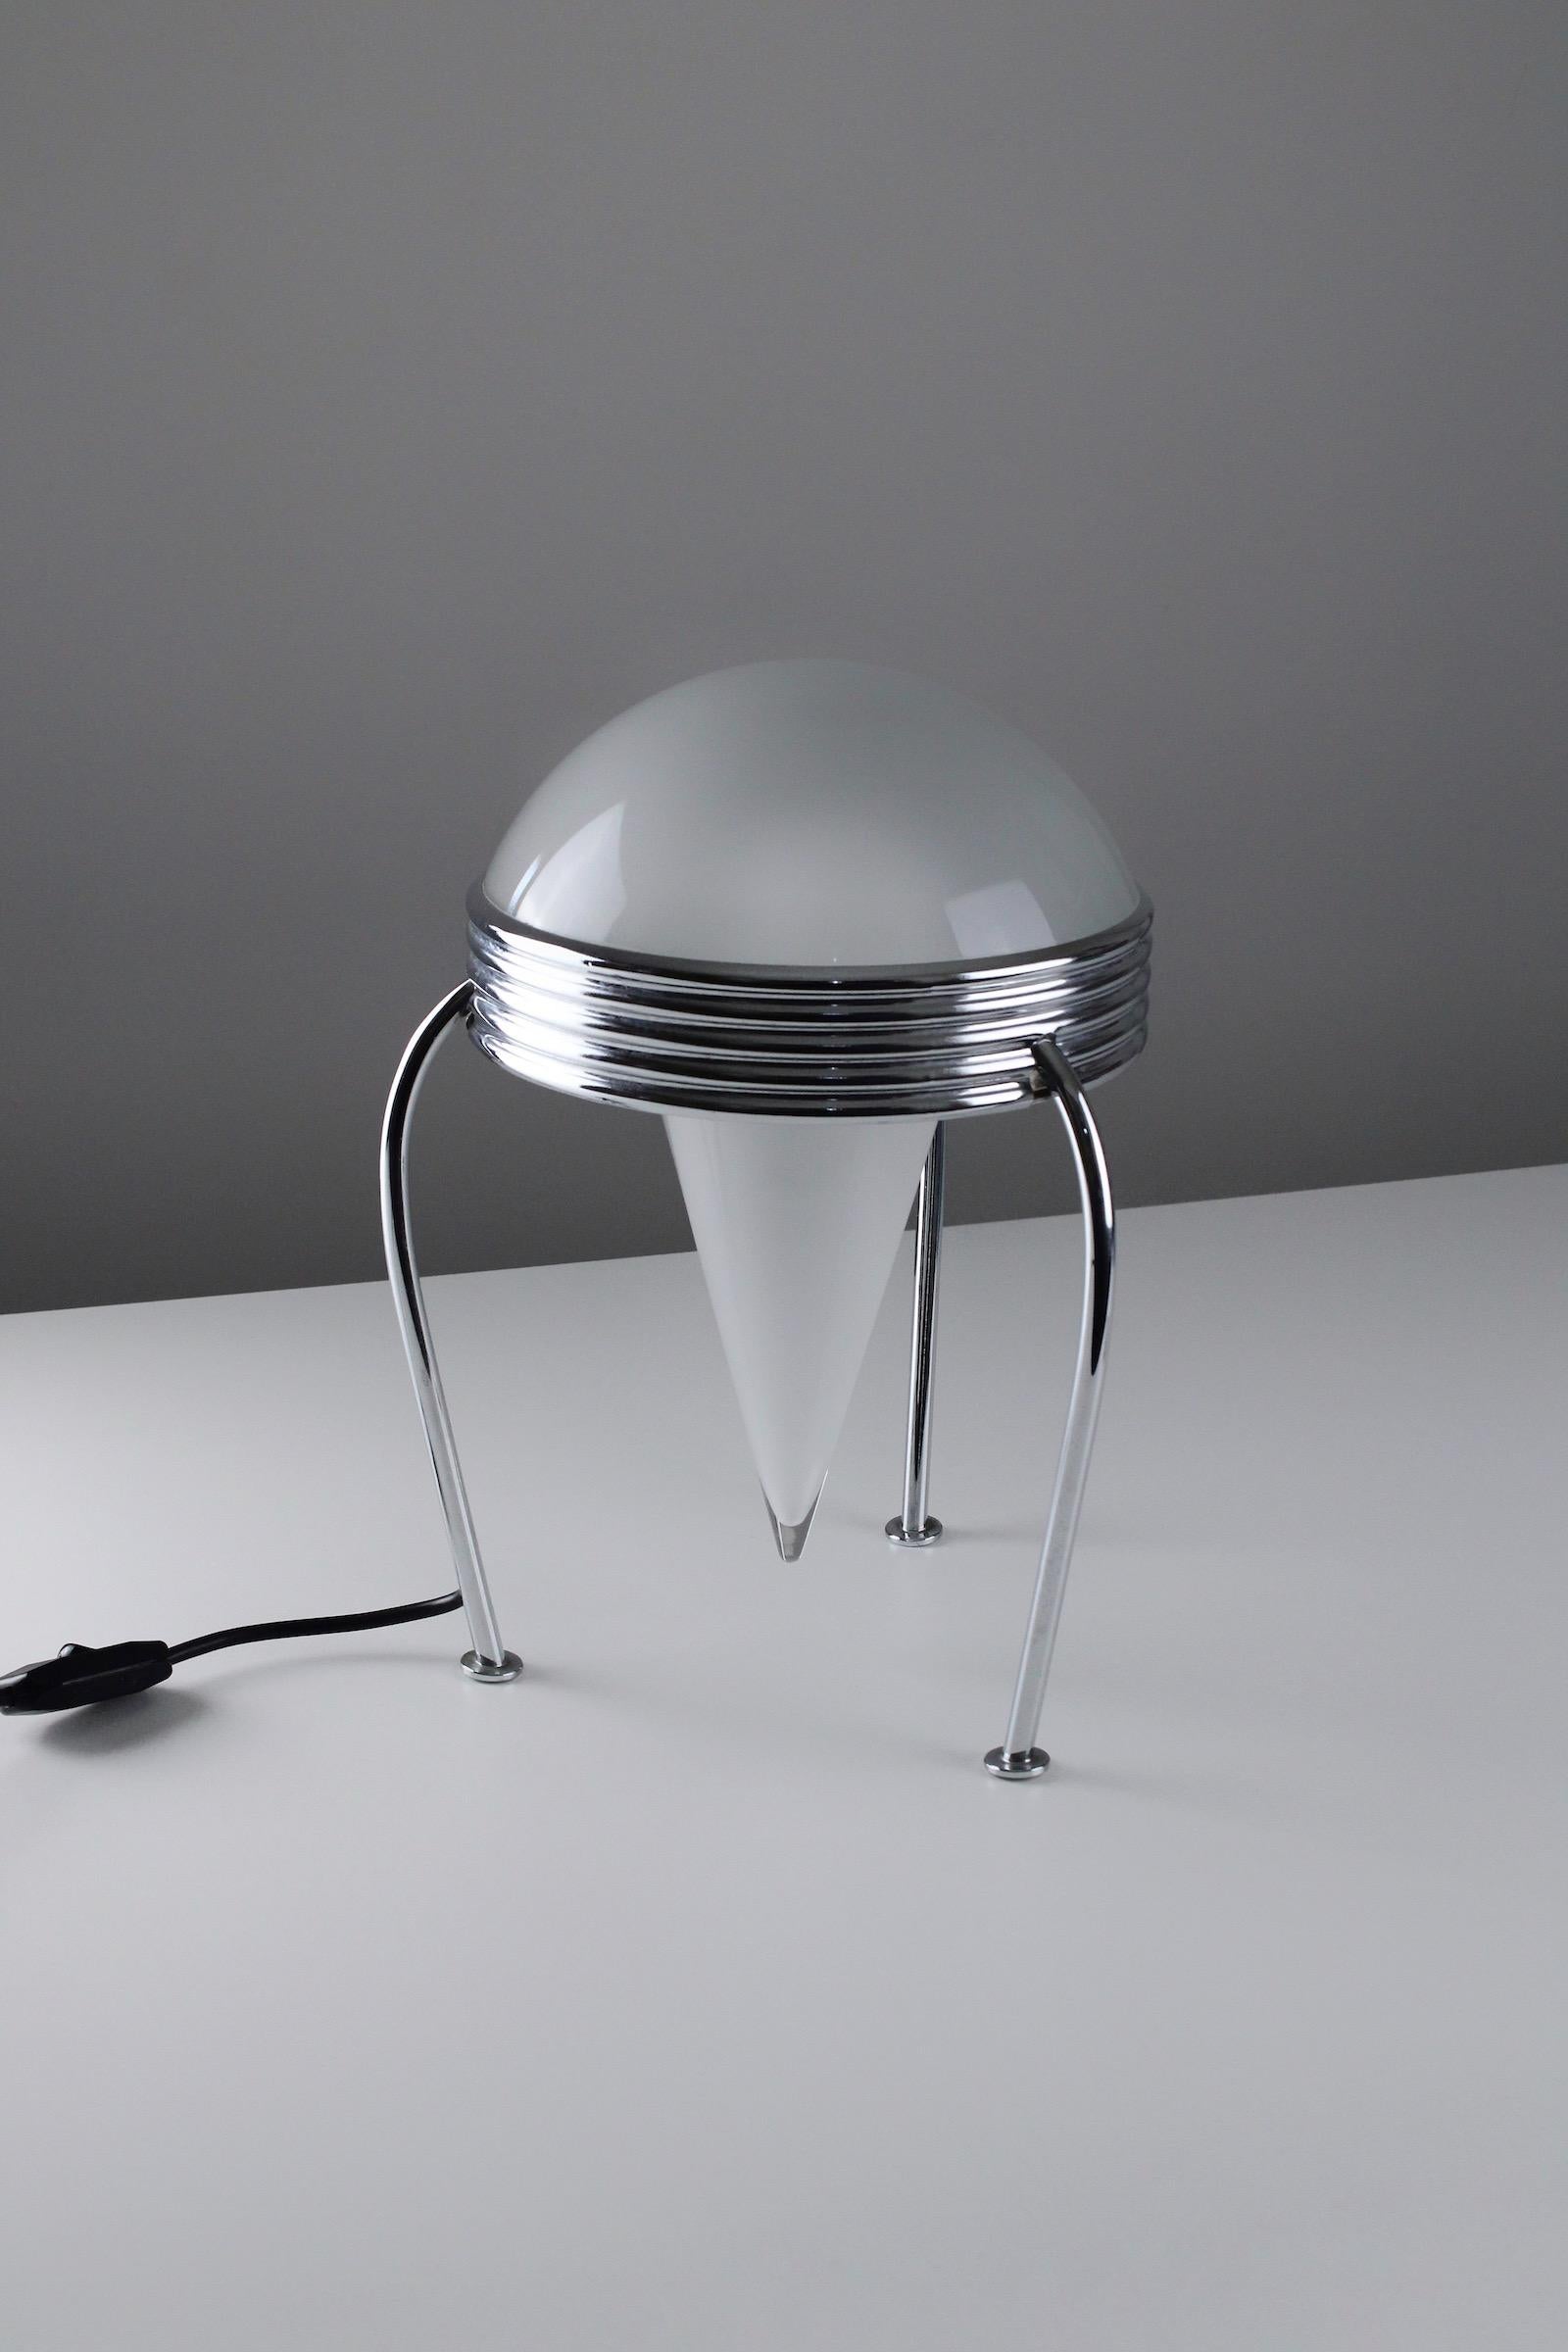 Rare table lamp model Numero Trenta made by Bieffeplast in Padova. Designed by Massimo Iosa Ghini in 1990. Impressive design in the style of Memphis. Made of chrome plated metal and glass. Overall condition is excellent.

Literature: Repertorio